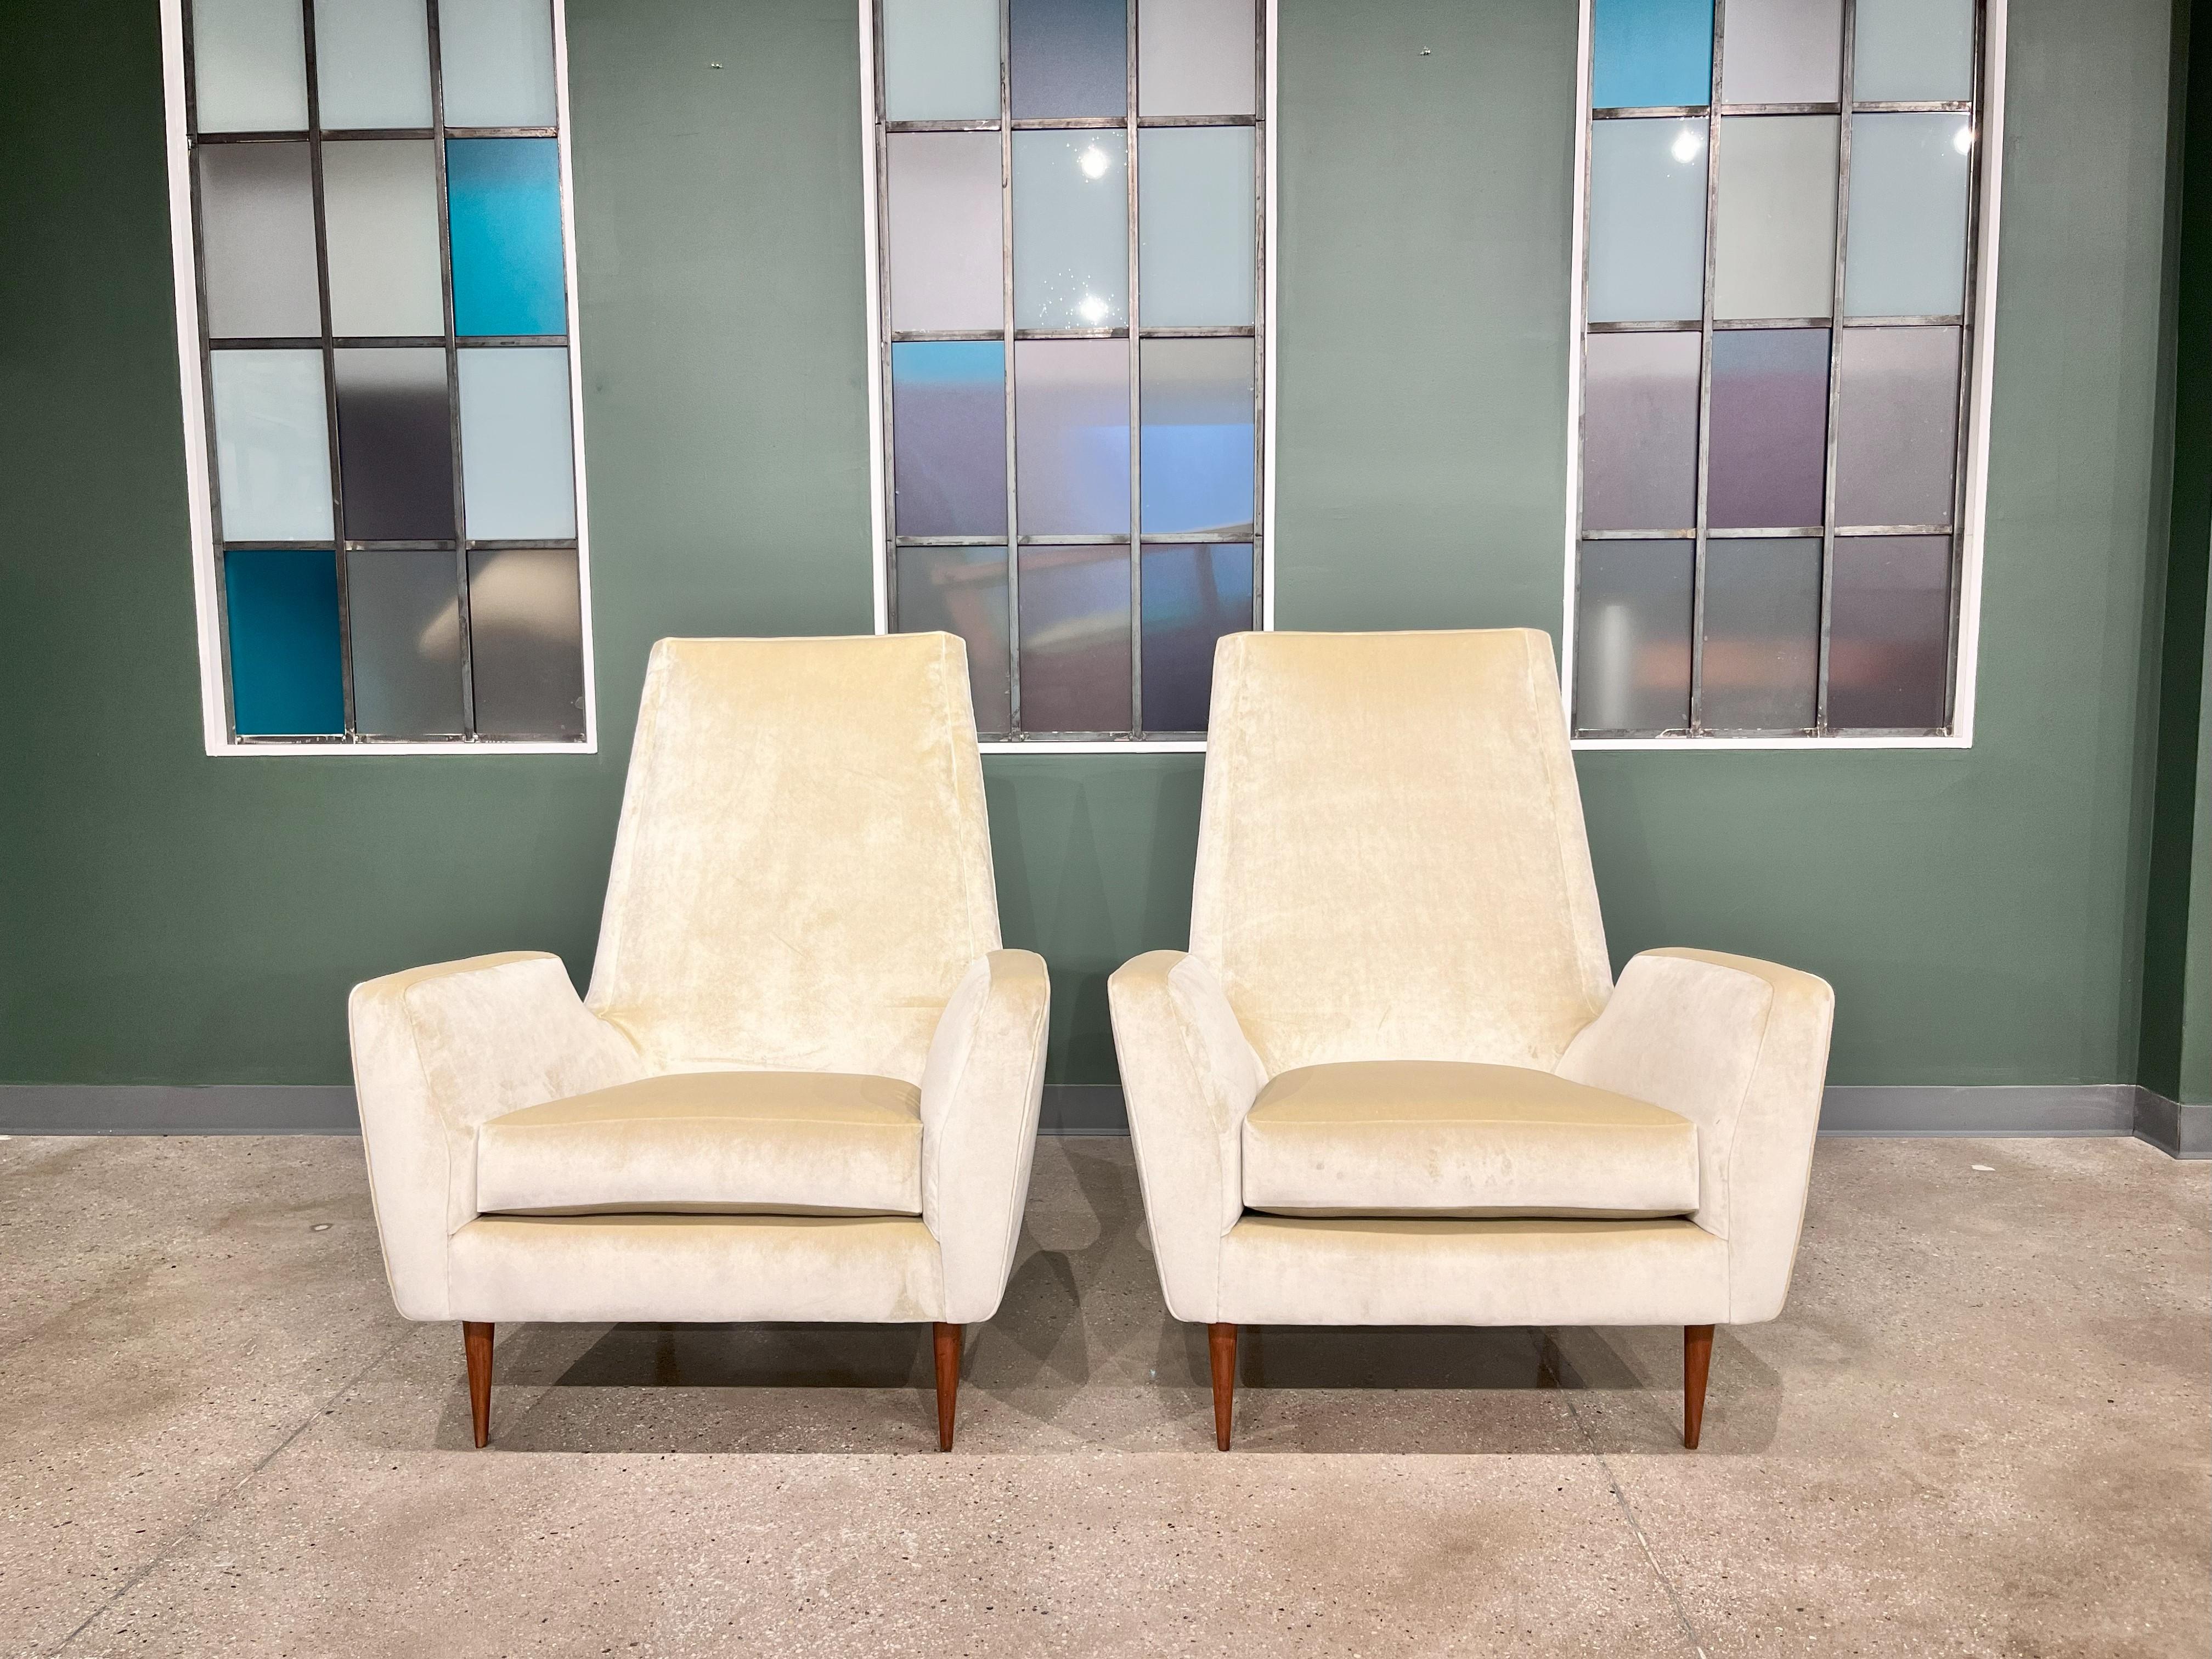 This pair of two high back armchairs has the typical Scapinelli style with its delicate lines and soft sensual shapes. The chairs rest on straight tapered legs supporting the sophisticated Beige Velvet cushions. The chairs are both comfortable with